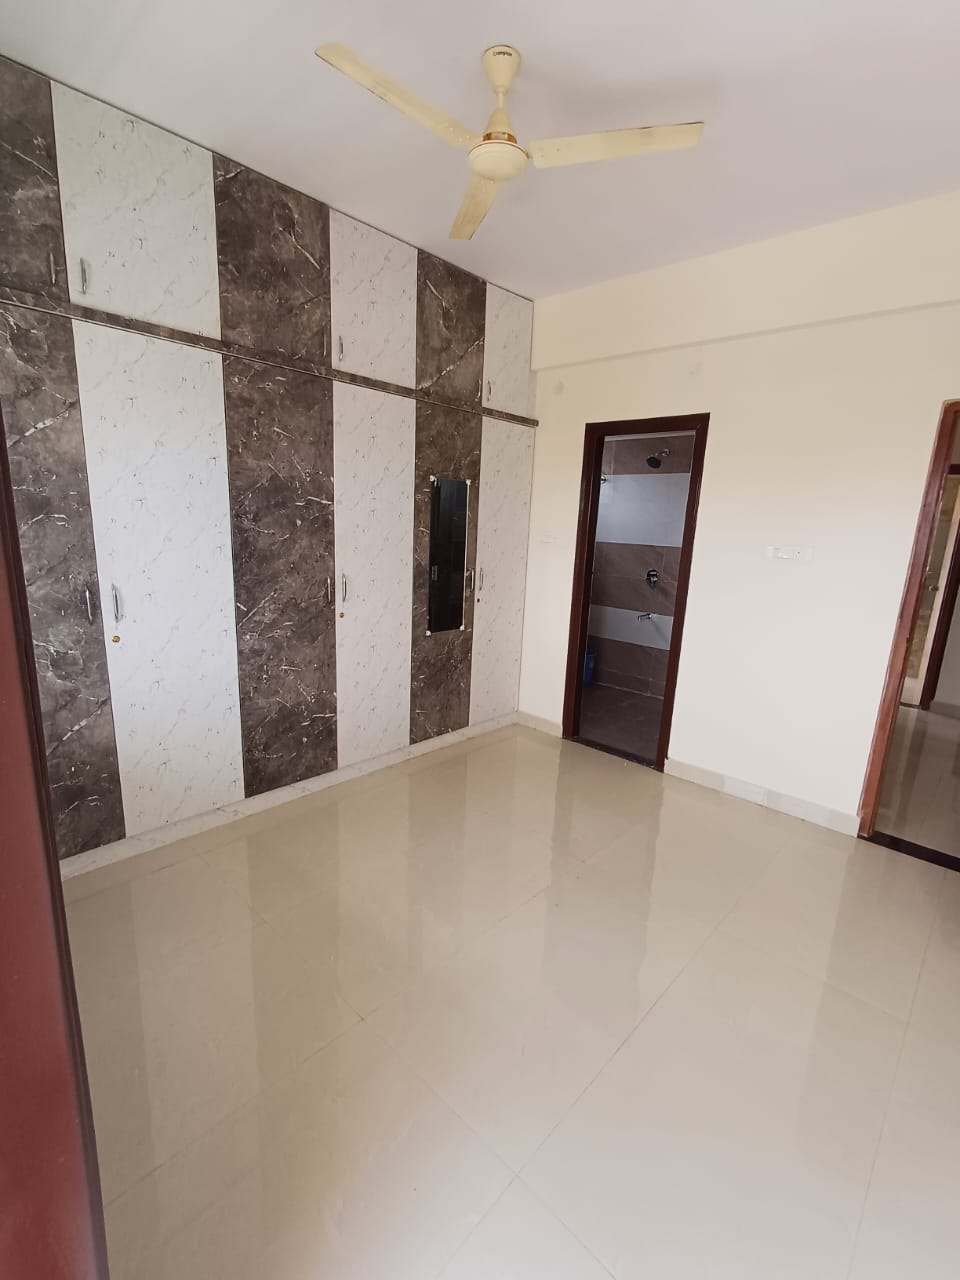 2 BHK Residential Apartment for Lease Only at JAML2 - 4104 in Konena Agrahara